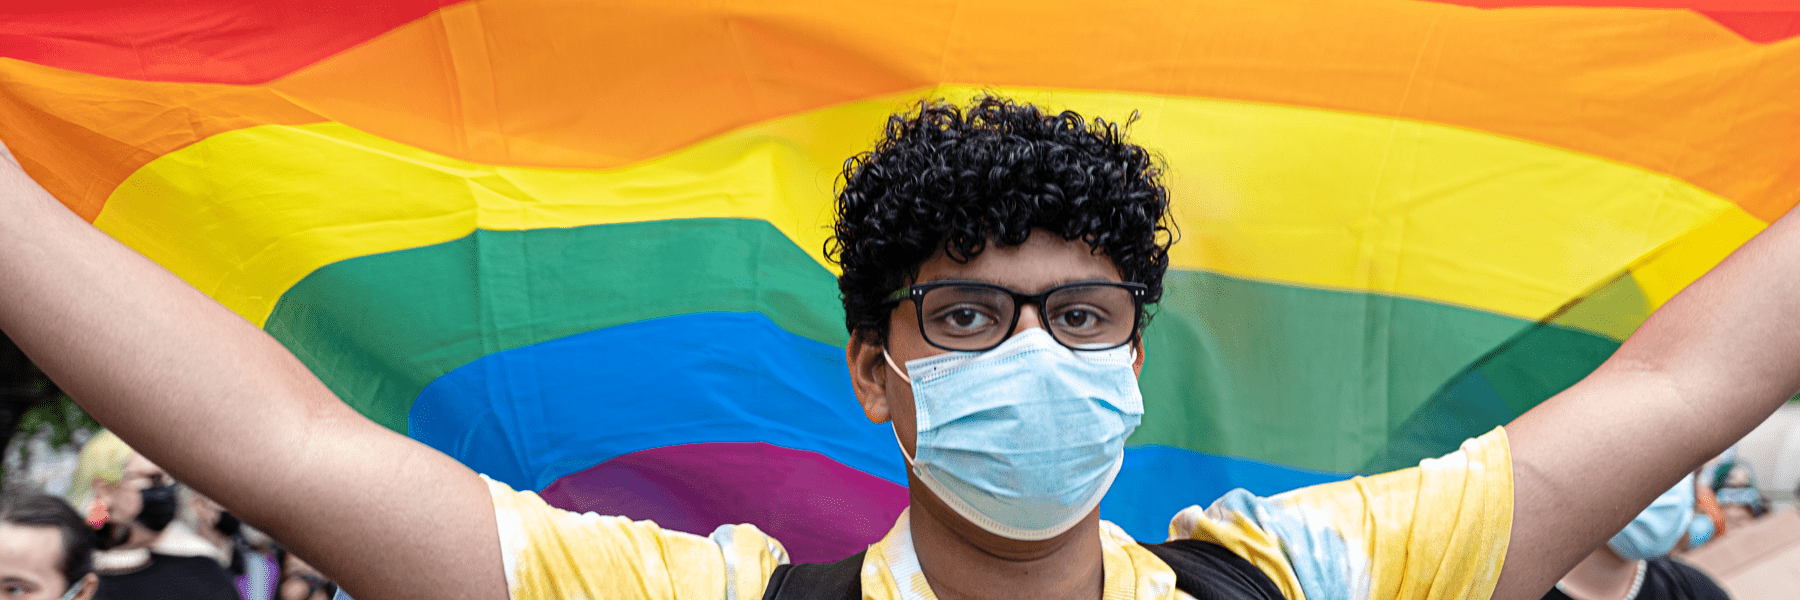 a young person with dark curly hair wearing a mask holds a large pride flag behind them